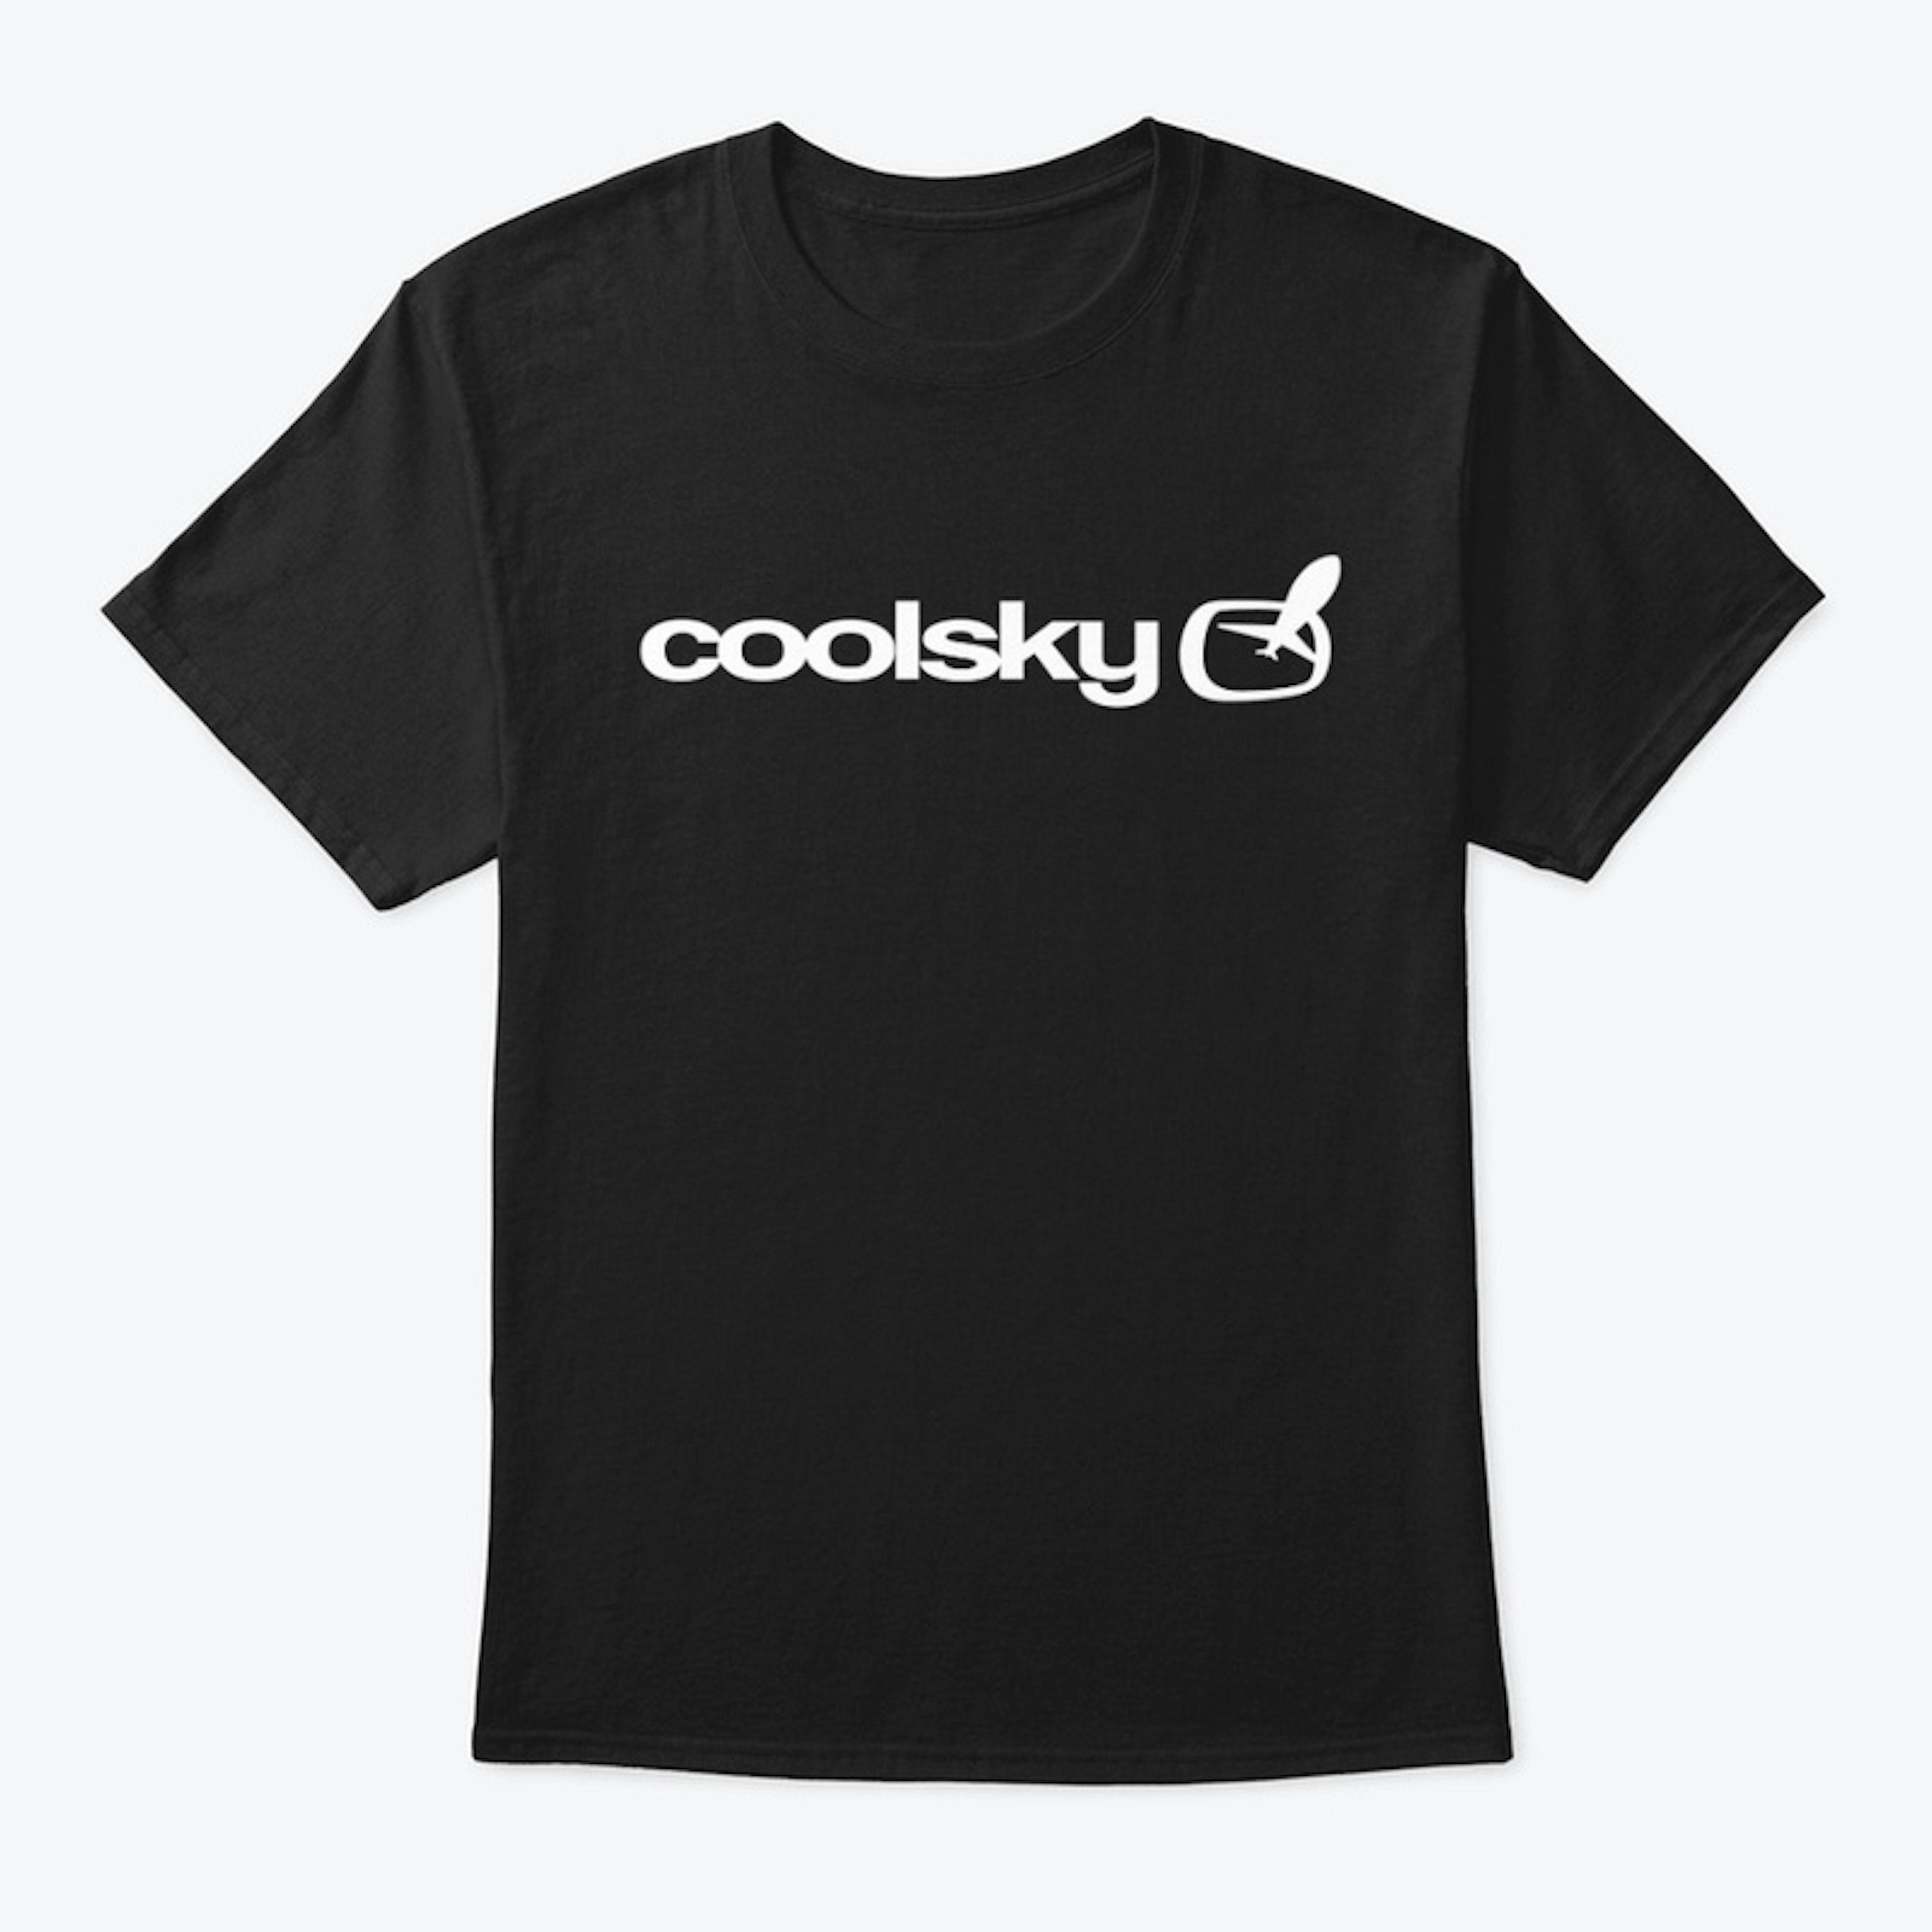 Coolsky White on Black Classic Tee